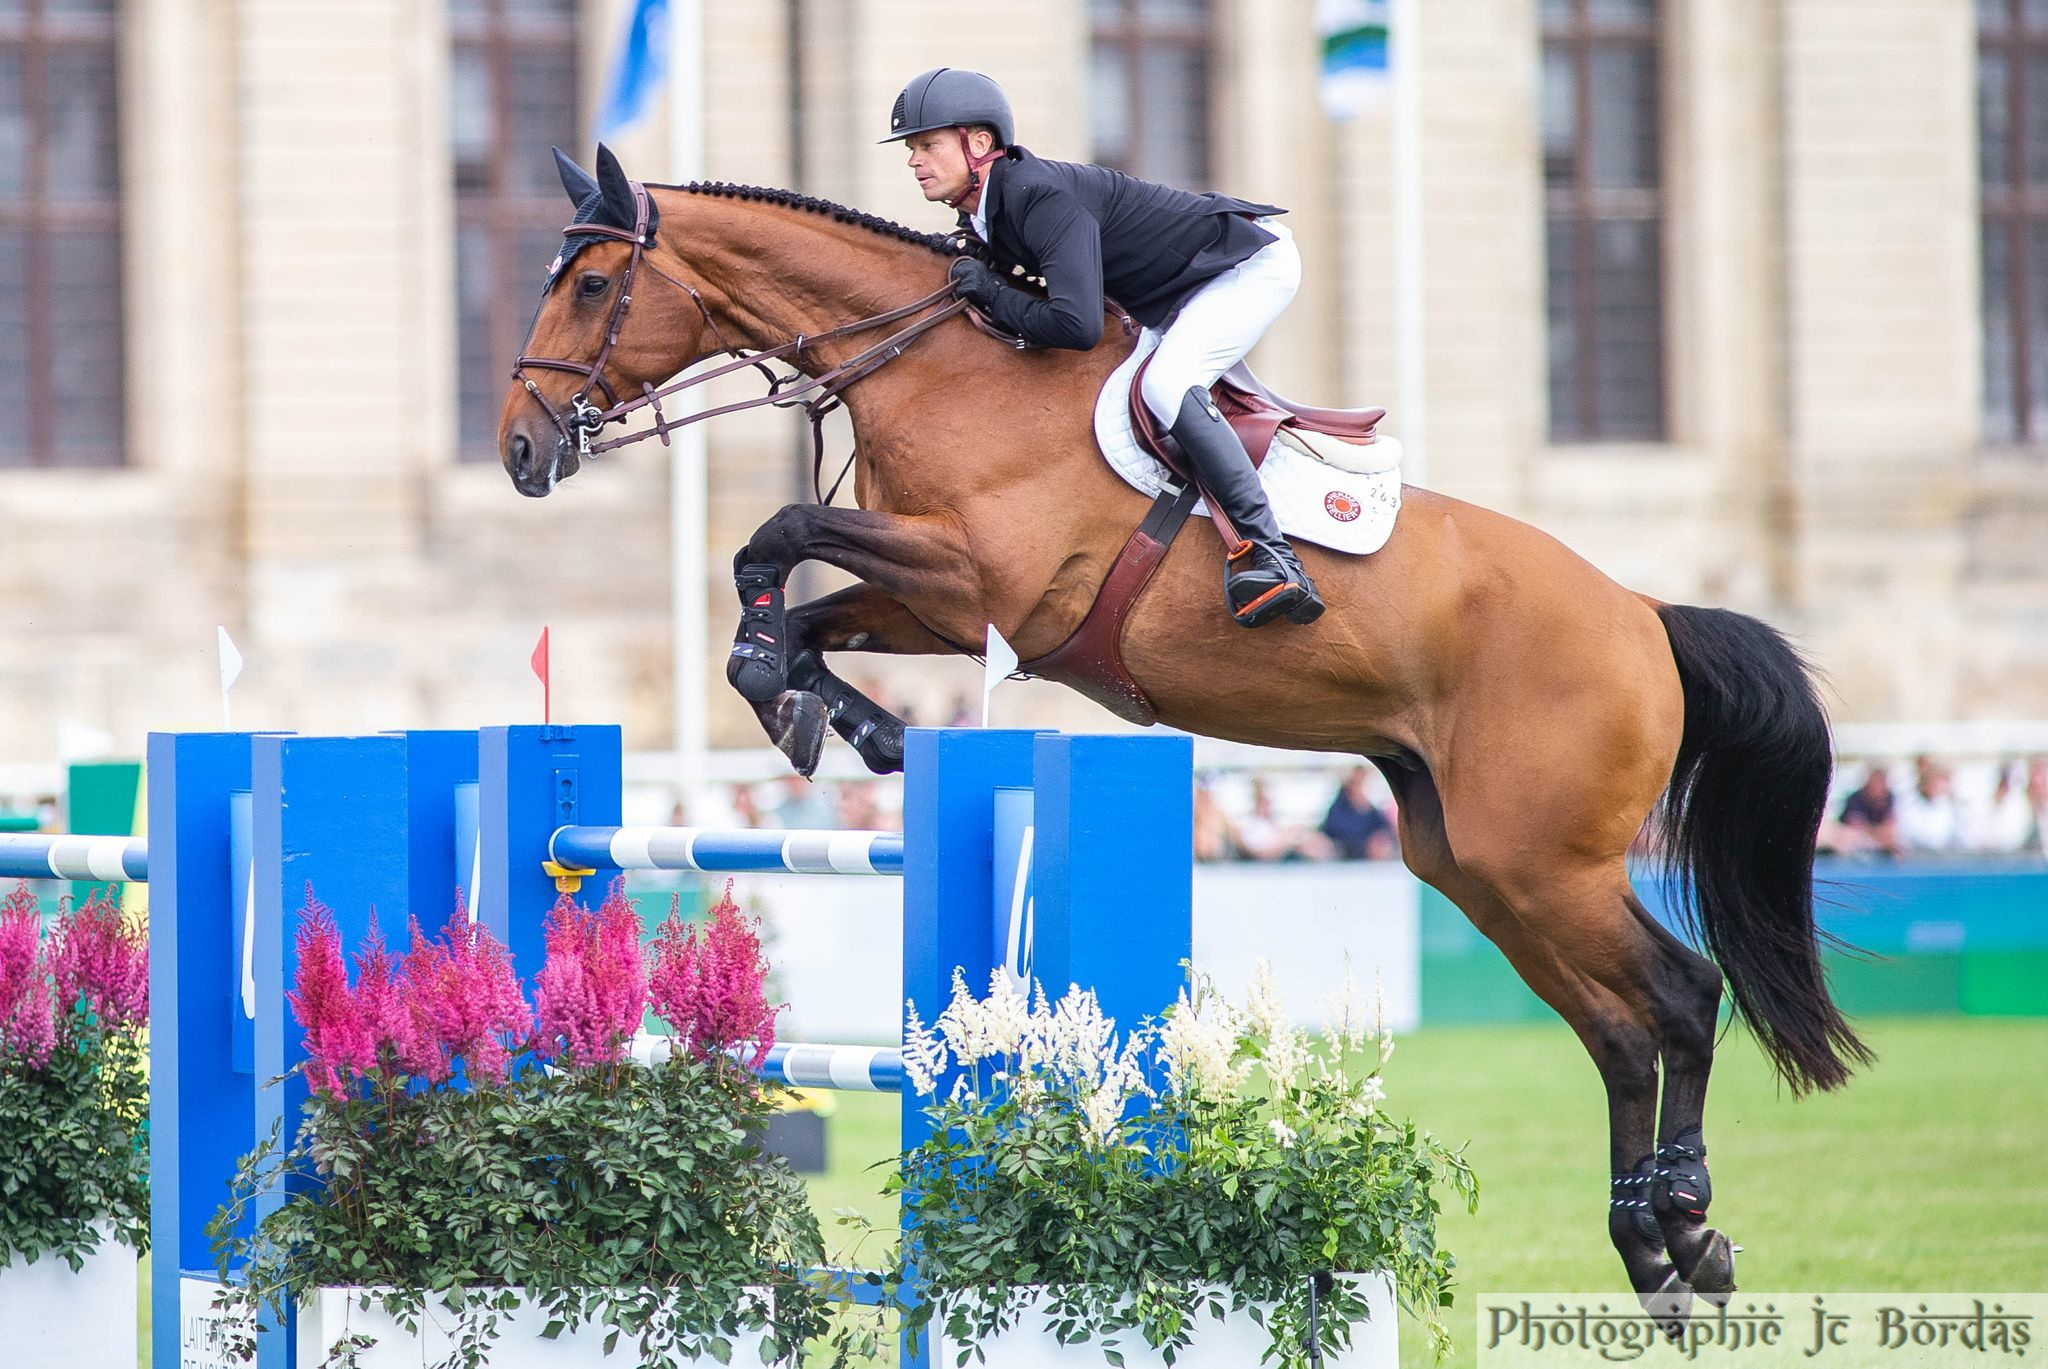 Jérôme Guery continues his good form in Dinard with a win in the opening CSI5* class